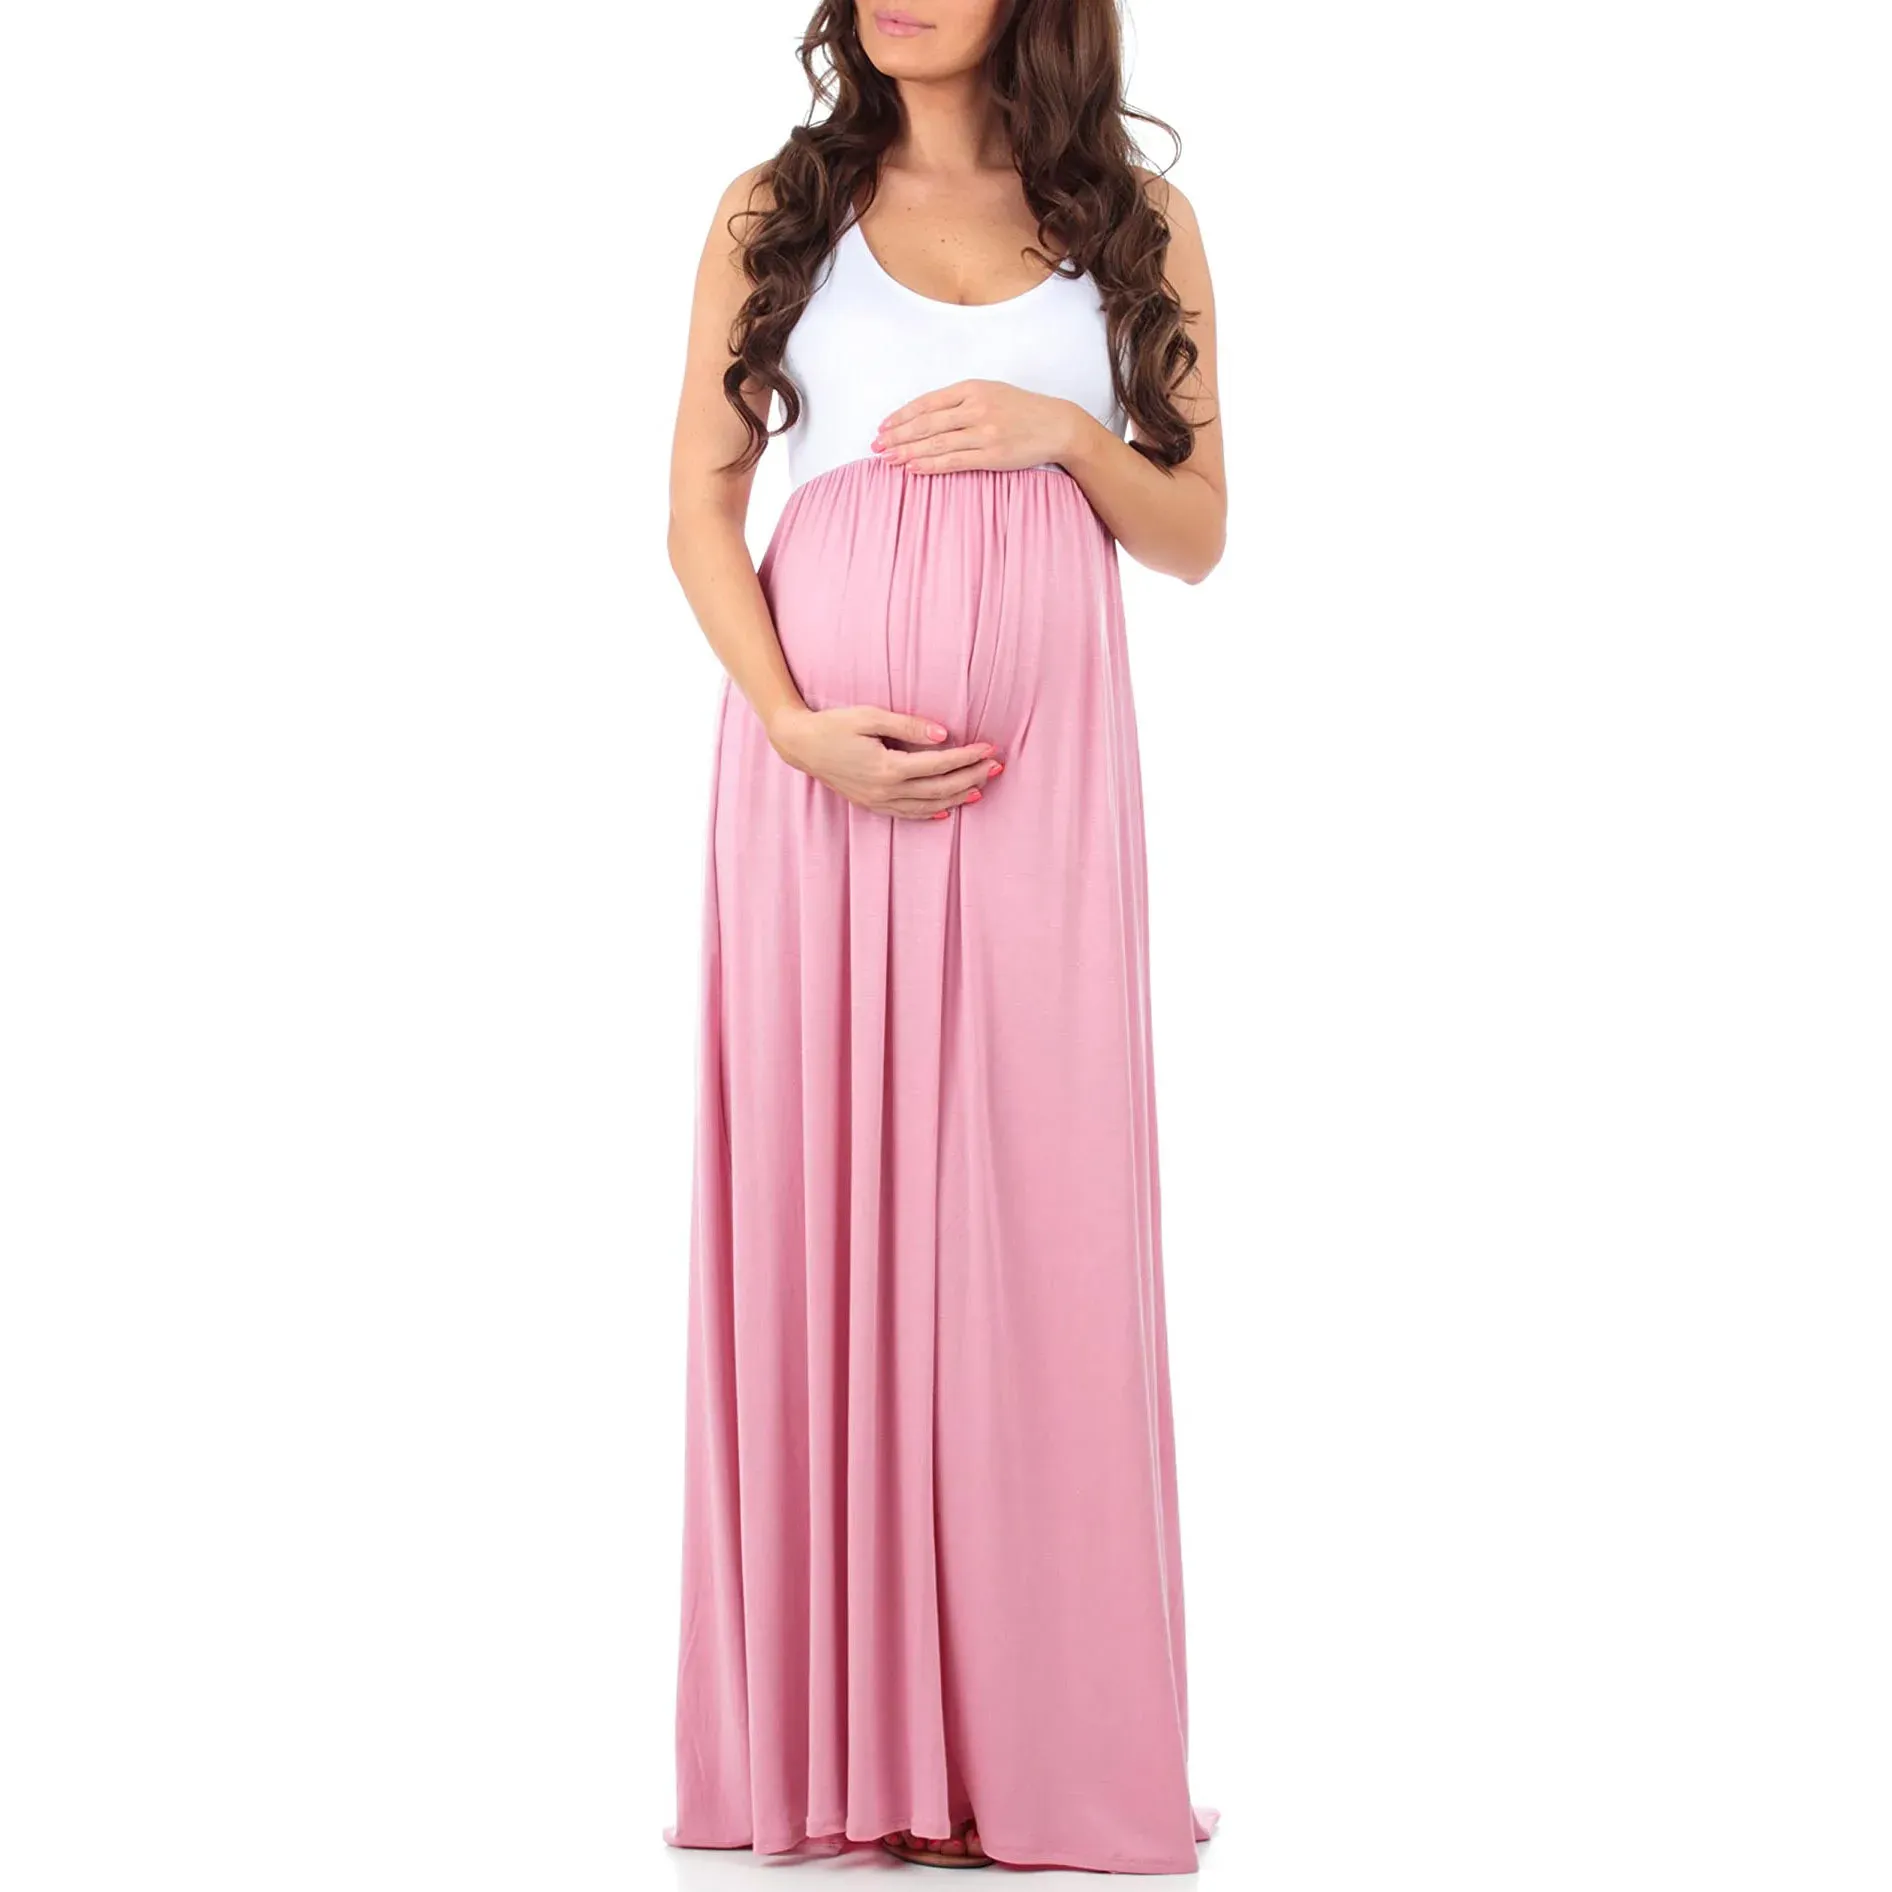 Dresses New Summer Casual Dresses For Pregnant Ladies Premama Contrast Color Beachwear Maxi Dress Maternity Gown Pregnancy Women Clothes